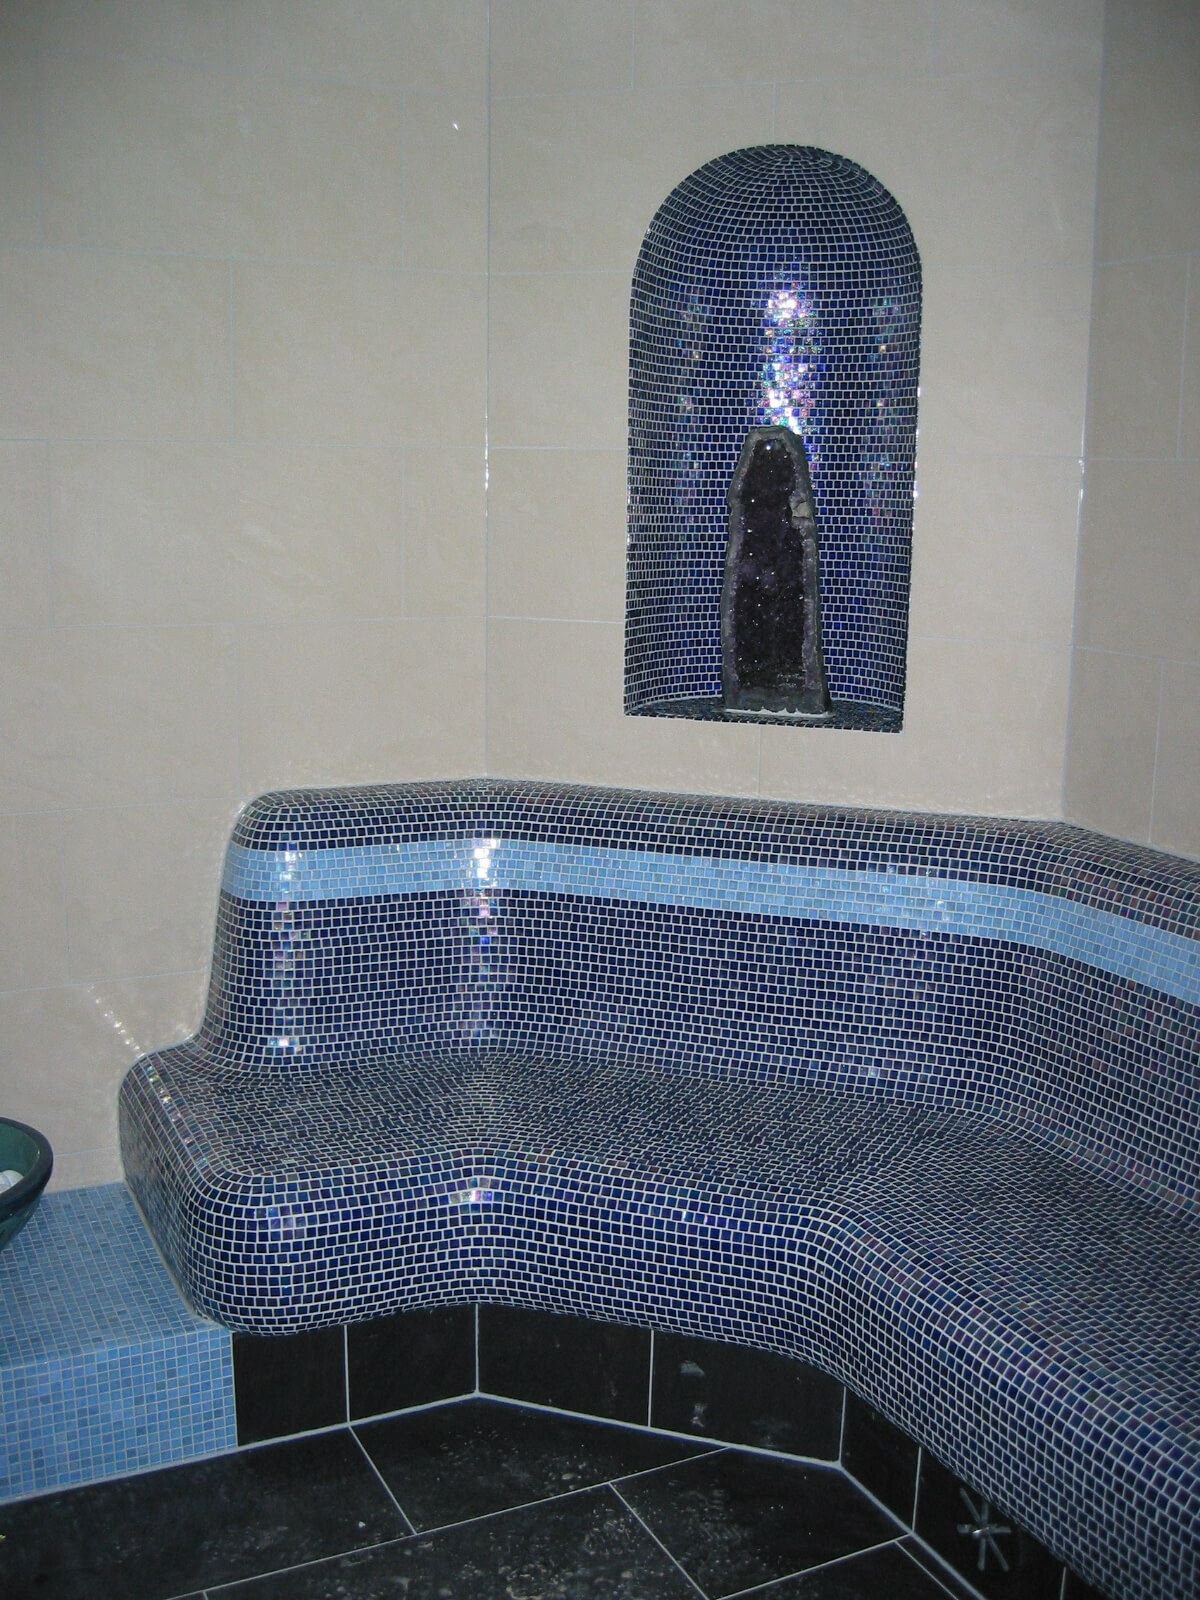 A blue tiled bench in a bathroom.